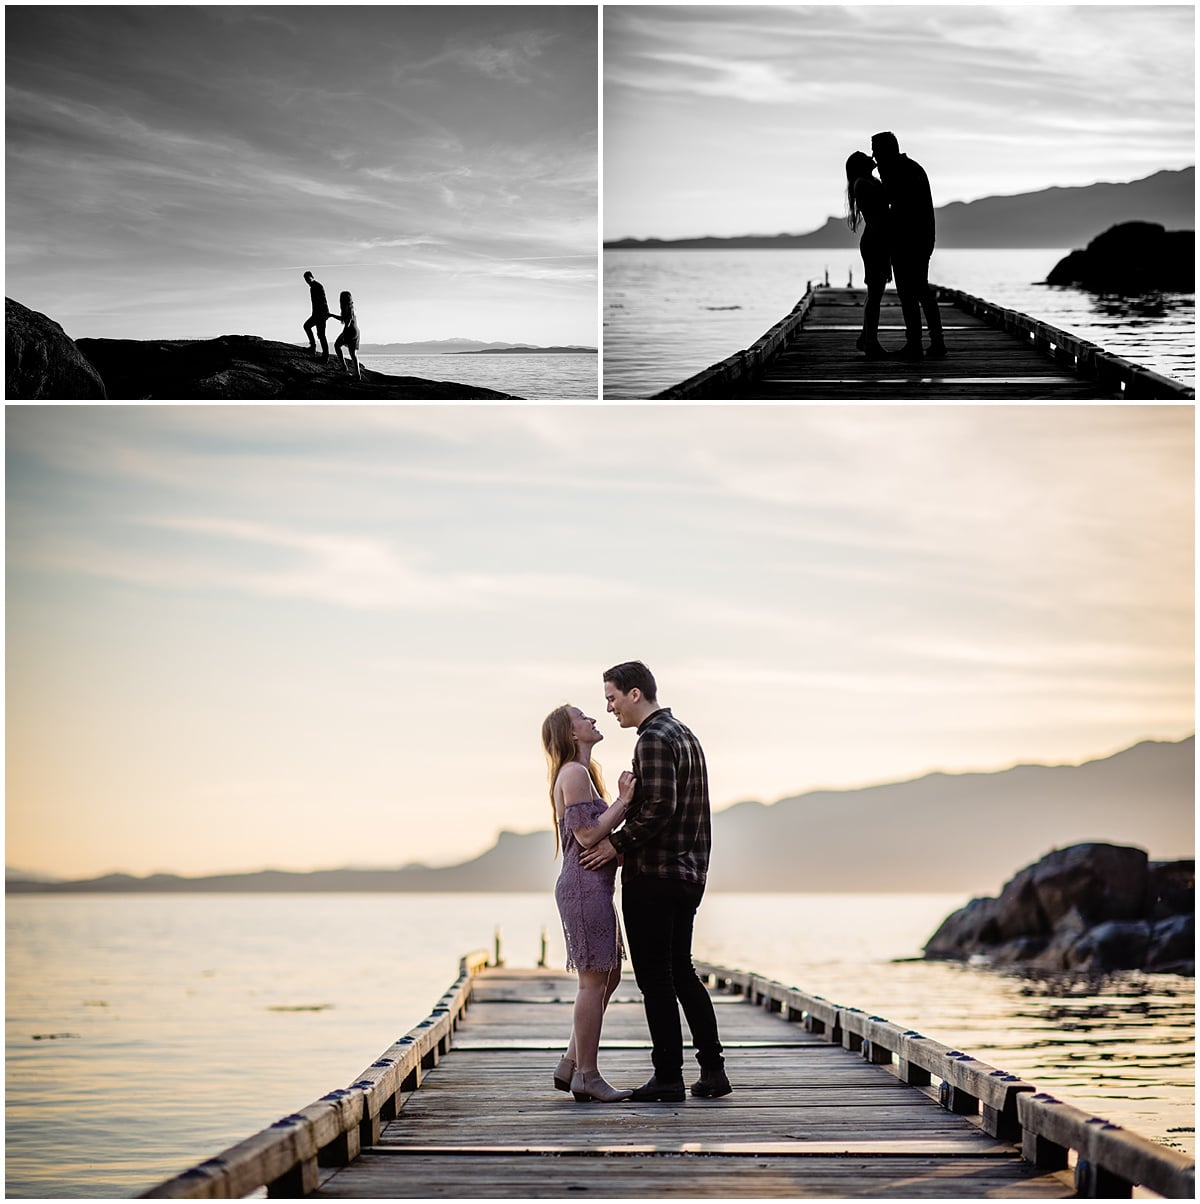 Silhouette images of a newly engaged couple celebrating their love in this seaside proposal story photographed by Sherry Nelsen of Fresh Air Photography